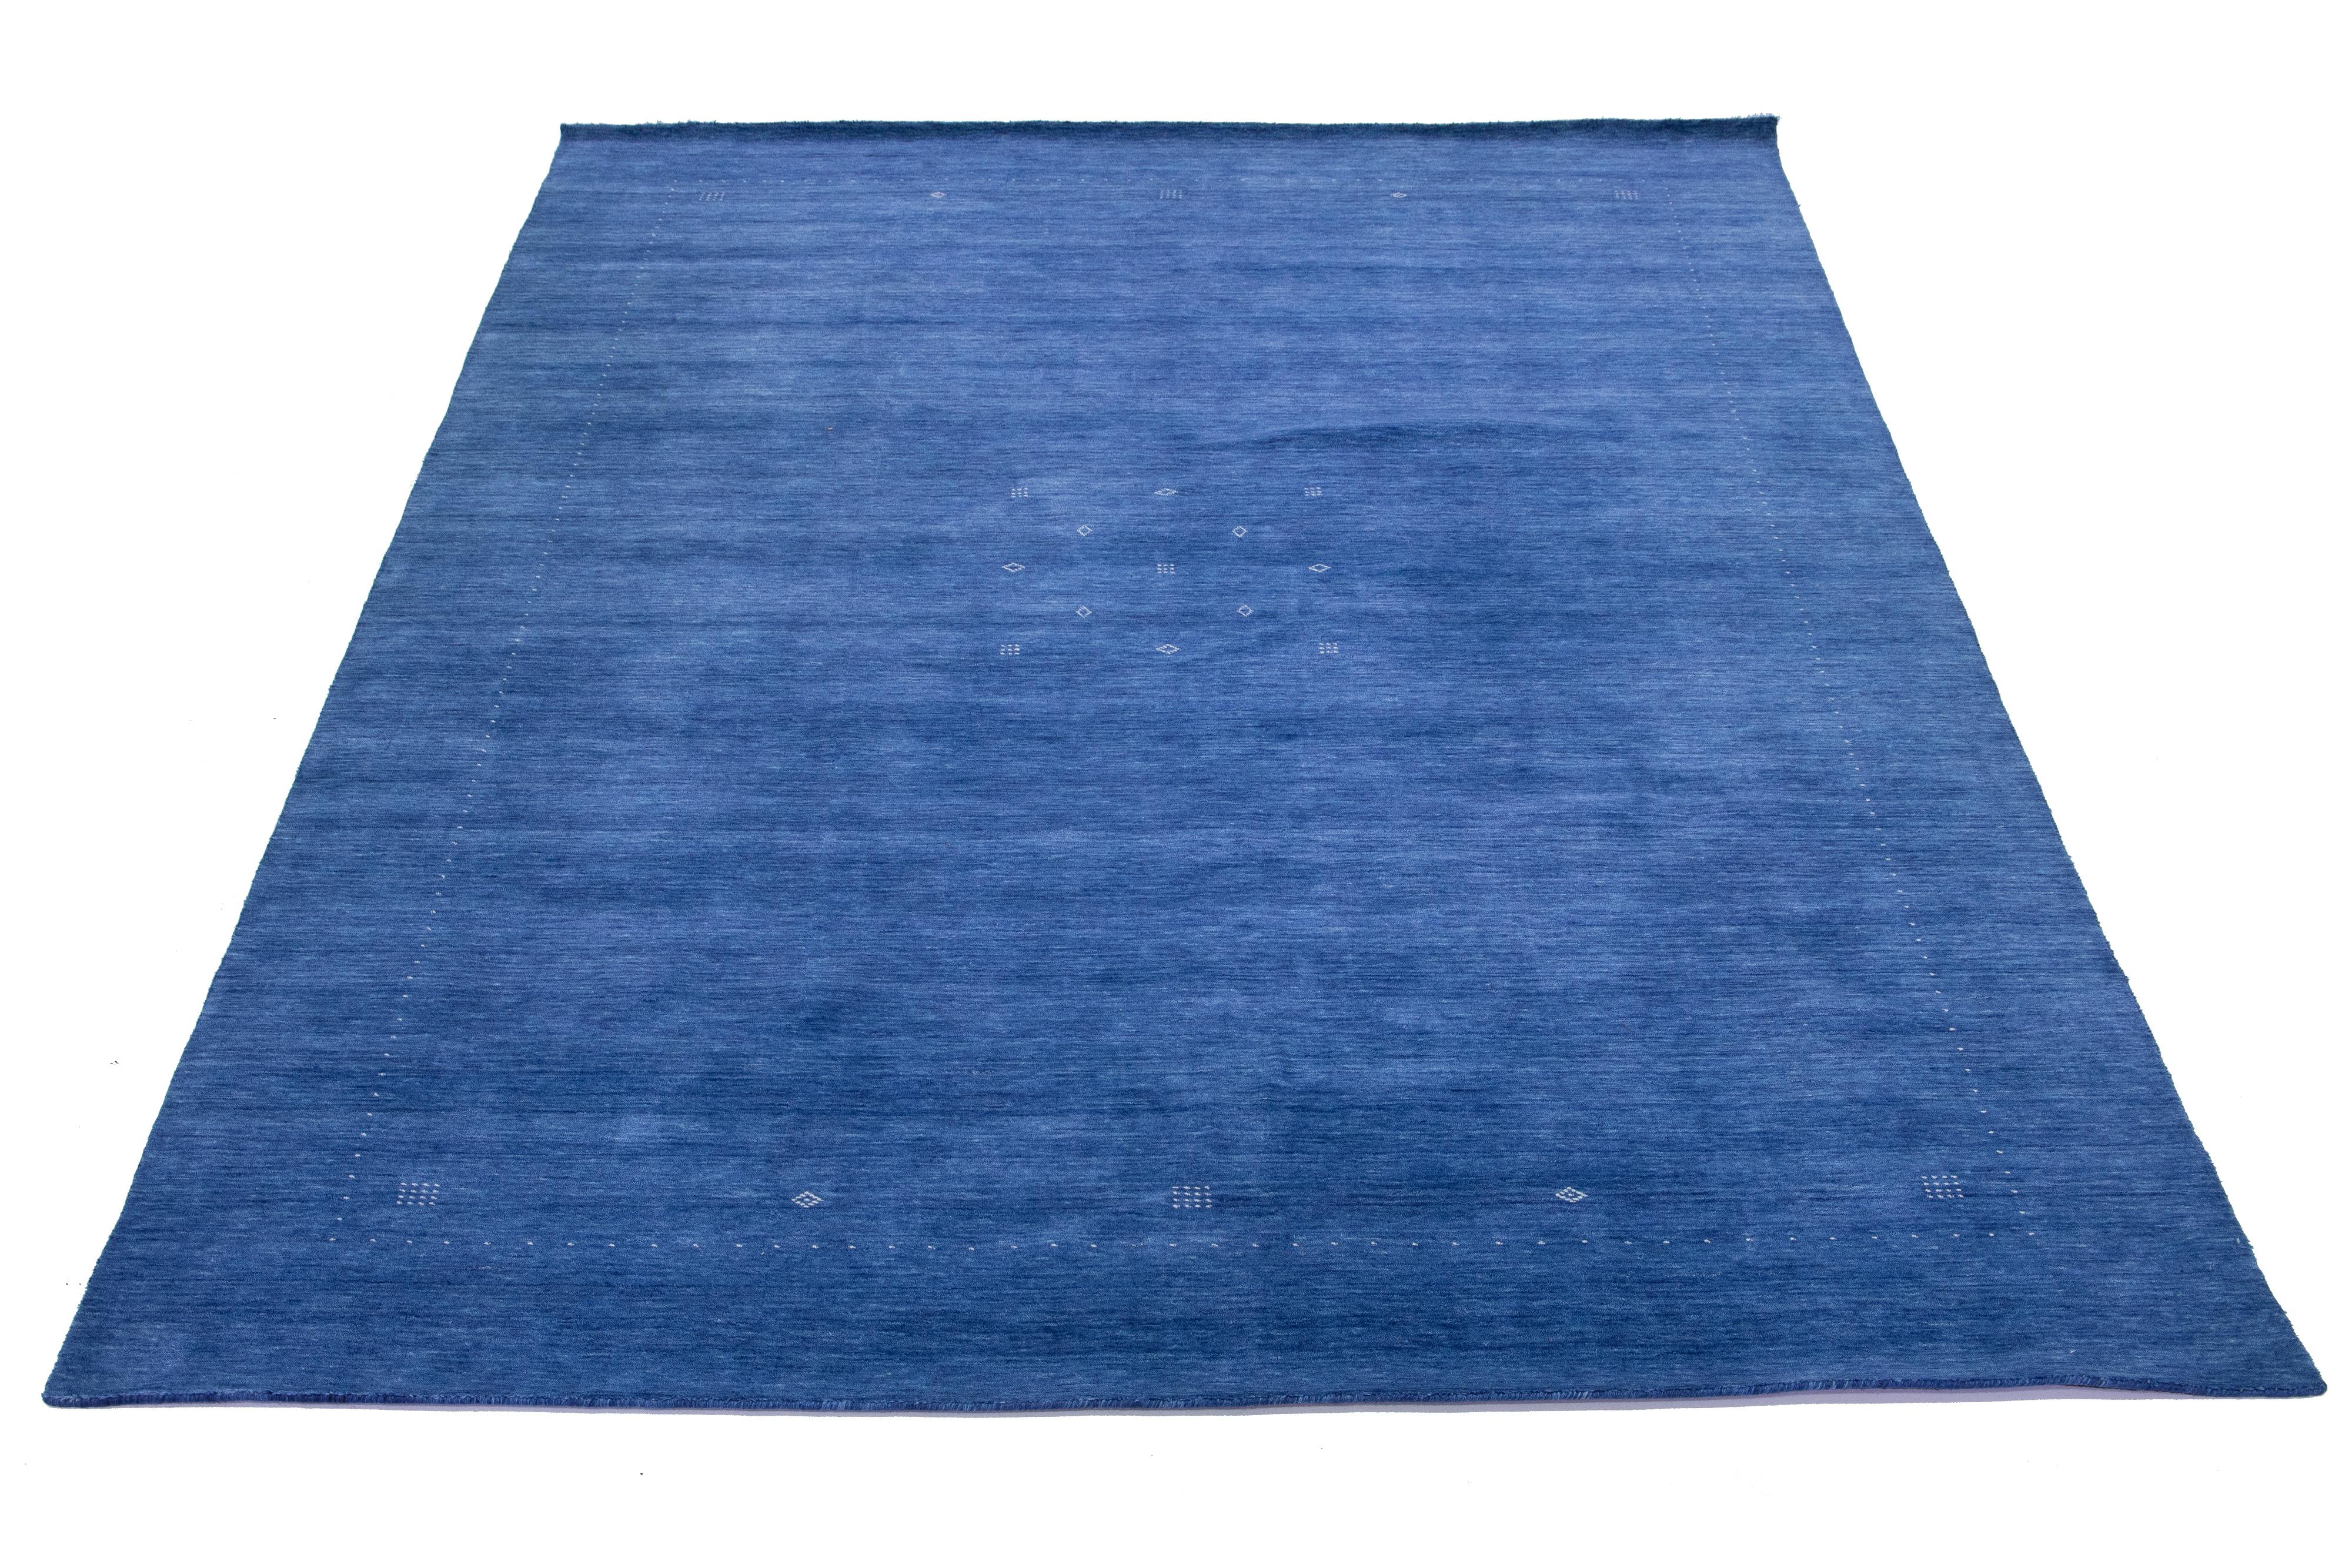 Beautiful modern Gabbeh-style hand-woven wool rug with a navy blue color field and gorgeous white minimalist design.

This rug measures: 9'10